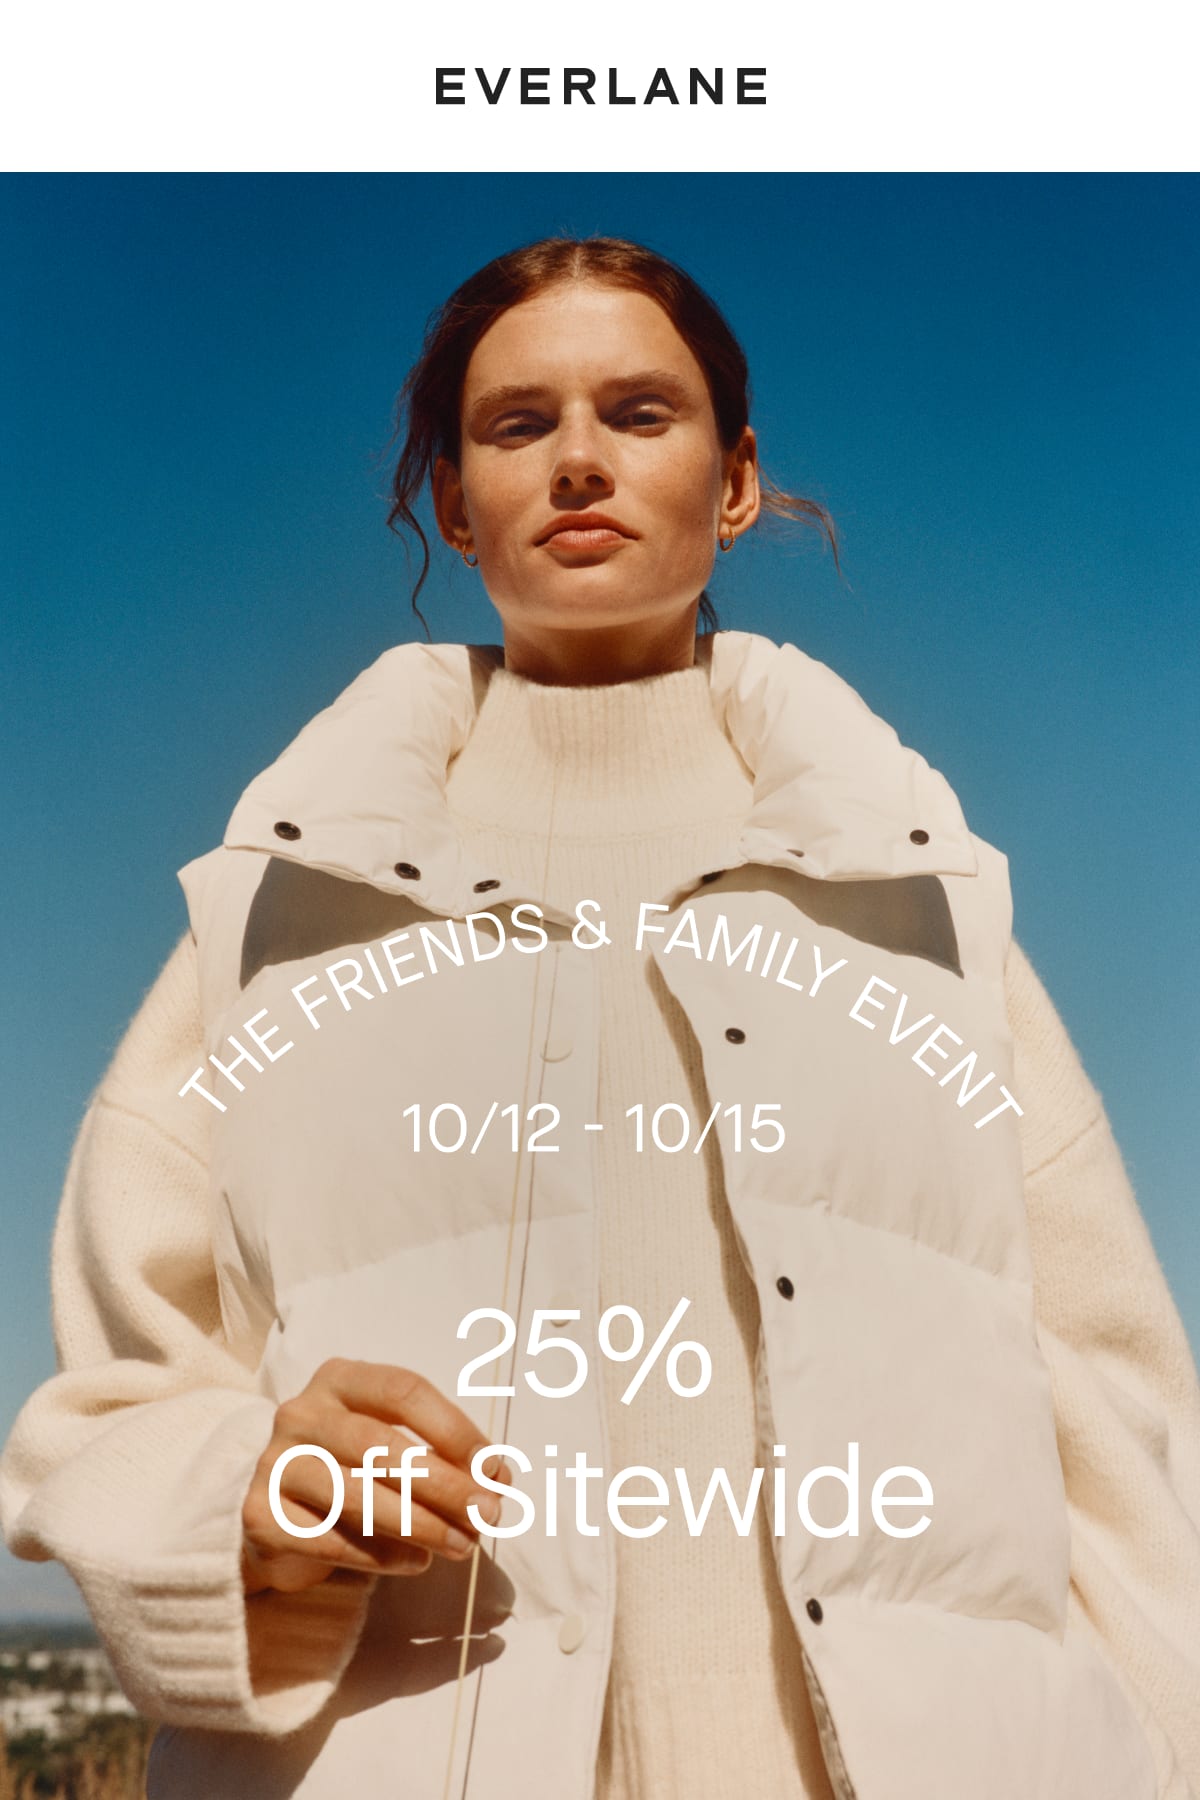 Everlane - The wait is over. Introducing the High Rise